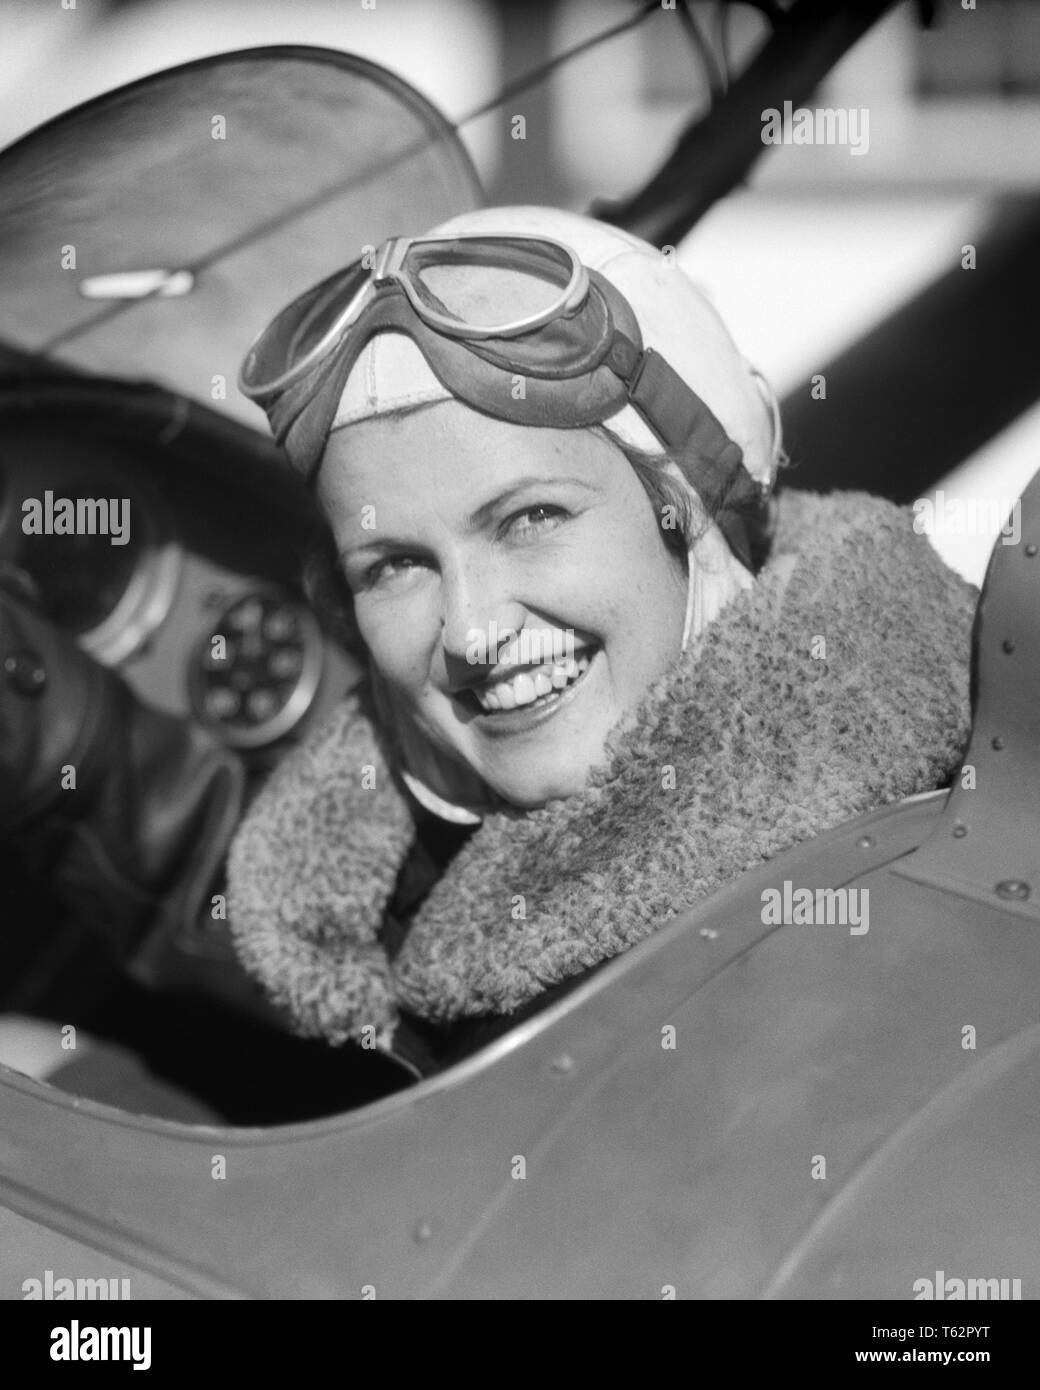 1930S woman pilot sitting in cockpit of airplane smiling looking at camera fur collar on jacket and goggles pushed up on head - a4370 HAR001 HARS FACIAL STYLE WELCOME PLEASED JOY LIFESTYLE PLANES FEMALES JOBS LADIES PERSONS GOGGLES RISK CONFIDENCE TRANSPORTATION EXPRESSIONS B&W EYE CONTACT SKILL OCCUPATION HAPPINESS SKILLS THRILL HEAD AND SHOULDERS CHEERFUL ADVENTURE AIRPLANES AND AT IN OF ON AVIATION EMPLOYMENT OCCUPATIONS PUSHED SMILES COCKPIT FUR COLLAR AVIATOR JOYFUL STYLISH AVIATRIX MID-ADULT MID-ADULT WOMAN BLACK AND WHITE BRAVE CAUCASIAN ETHNICITY HAR001 OLD FASHIONED Stock Photo